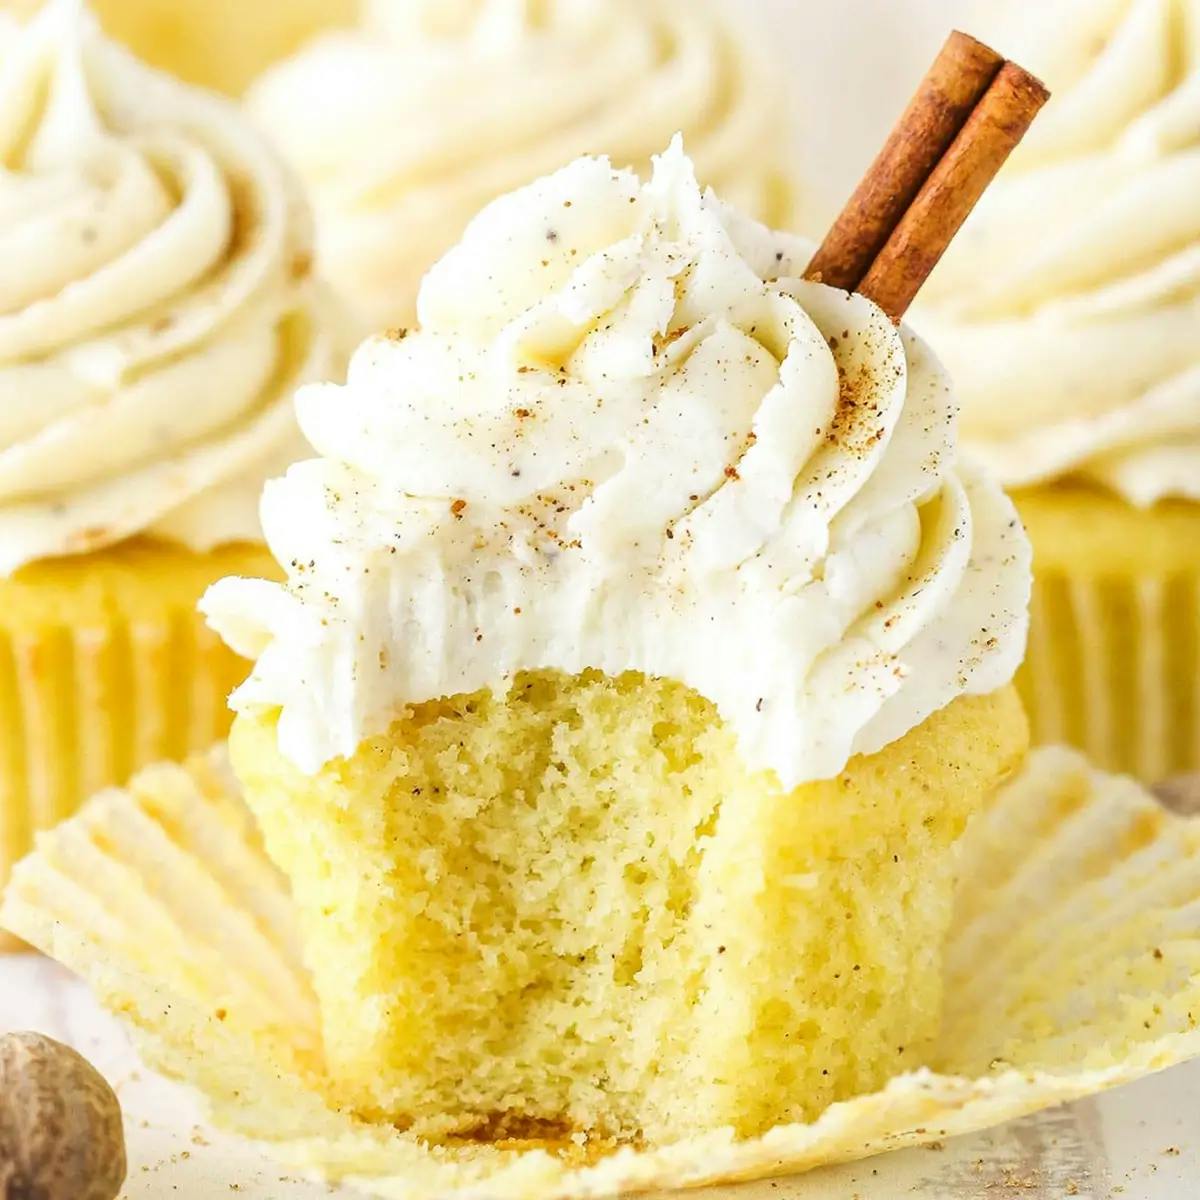 A yellow cupcake with white frosting, sprinkled with nutmeg.